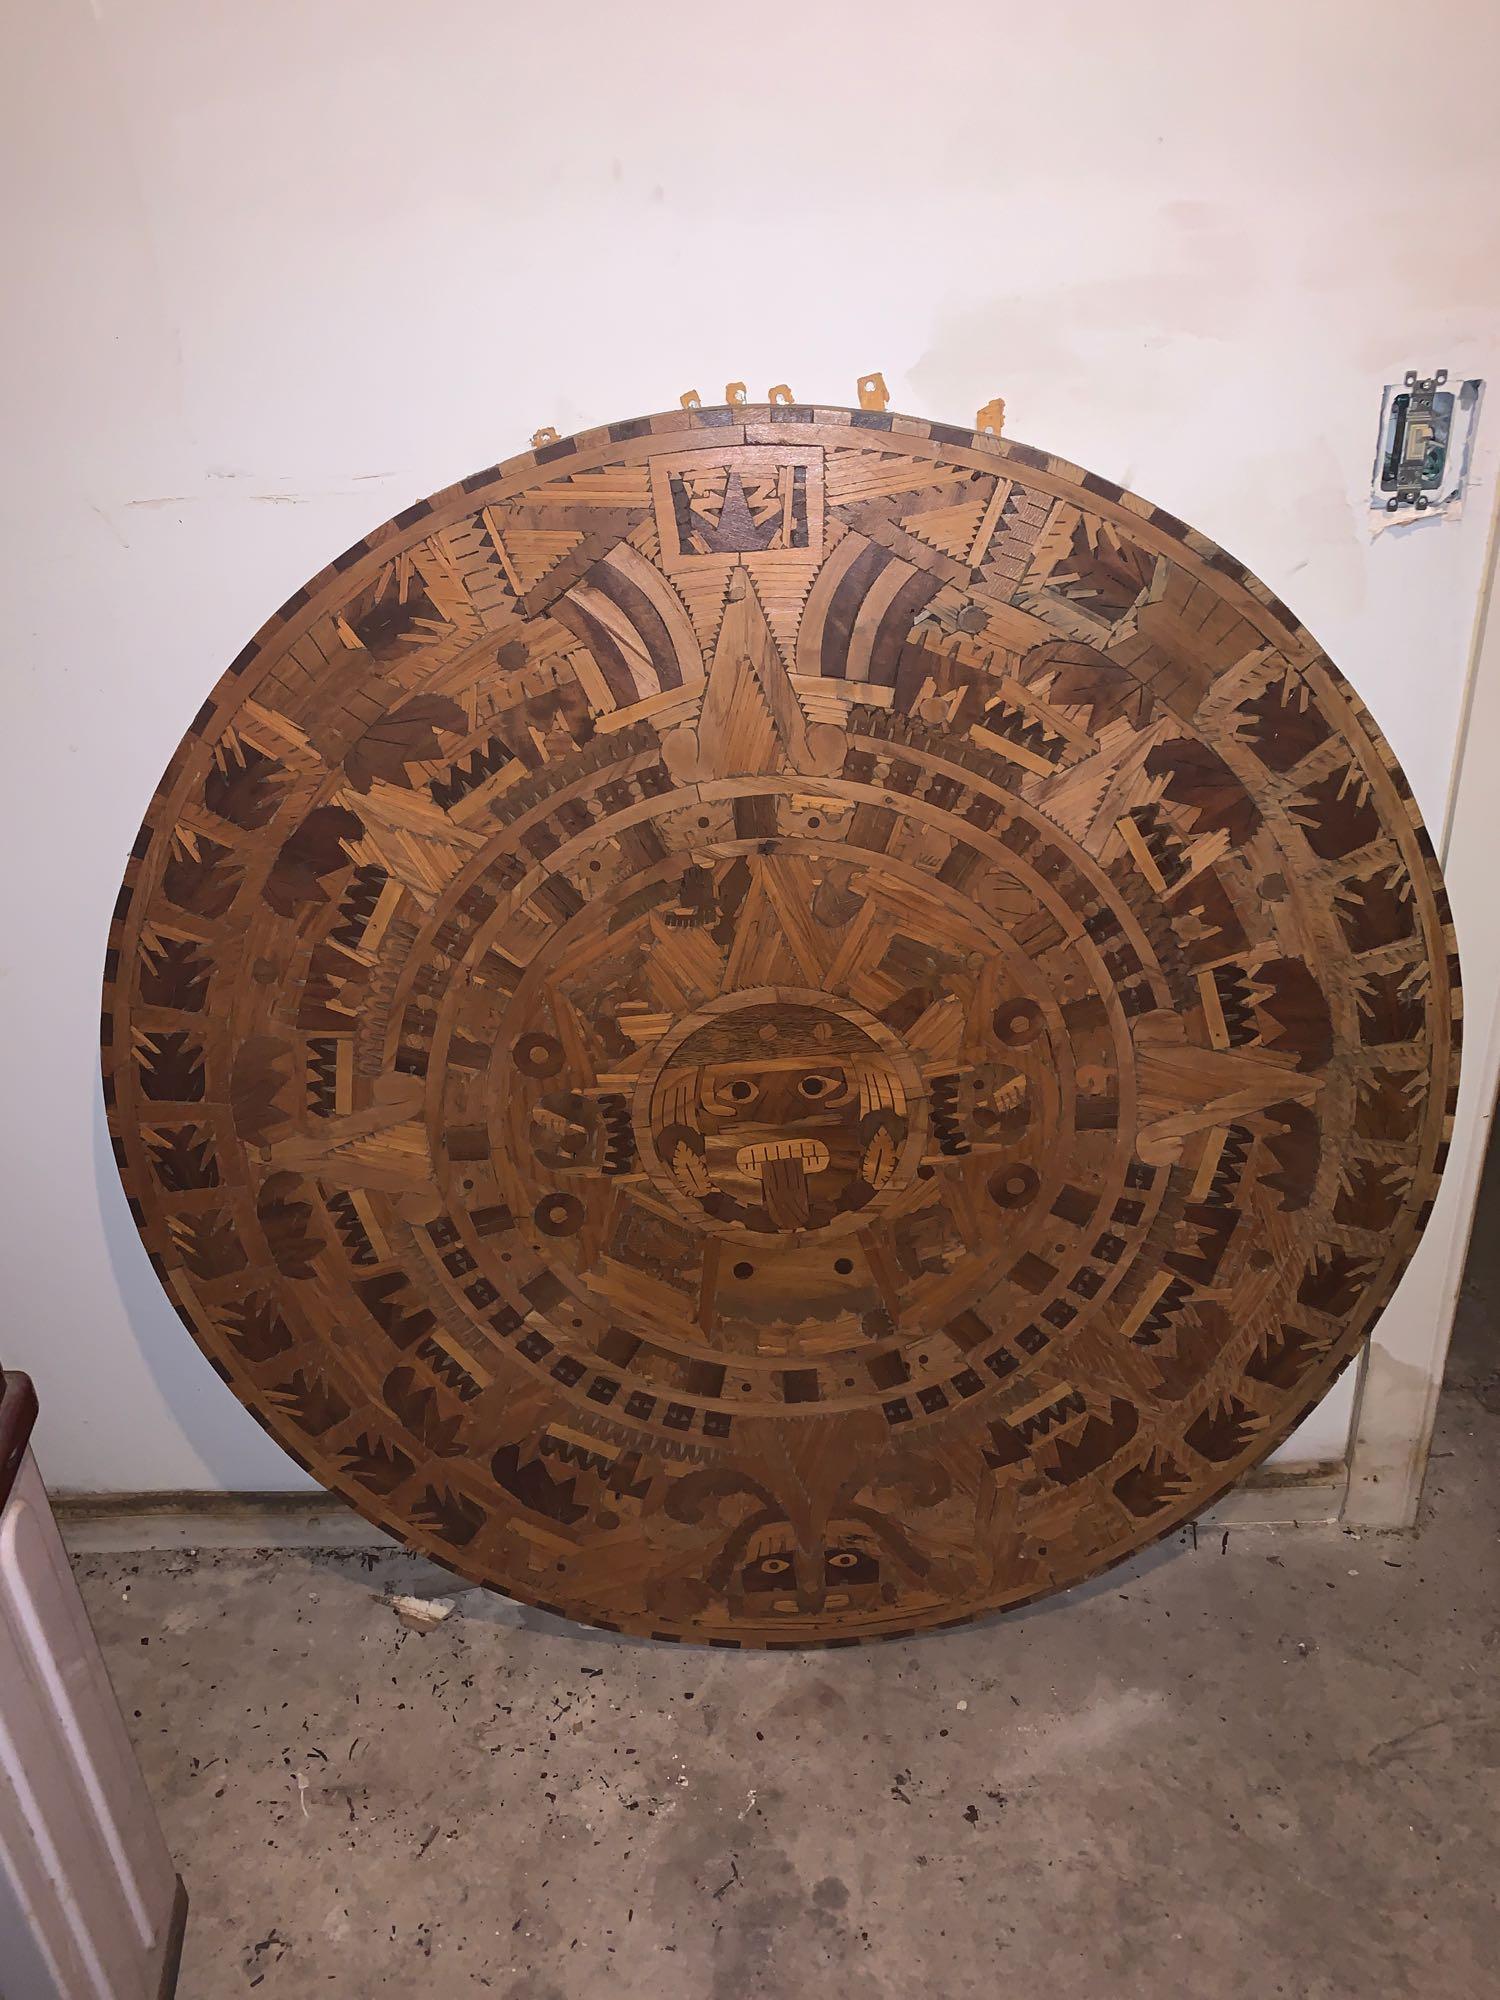 Solid Wood hand-carved Mayan Calendar from "Mayan Mind Bender" Attraction